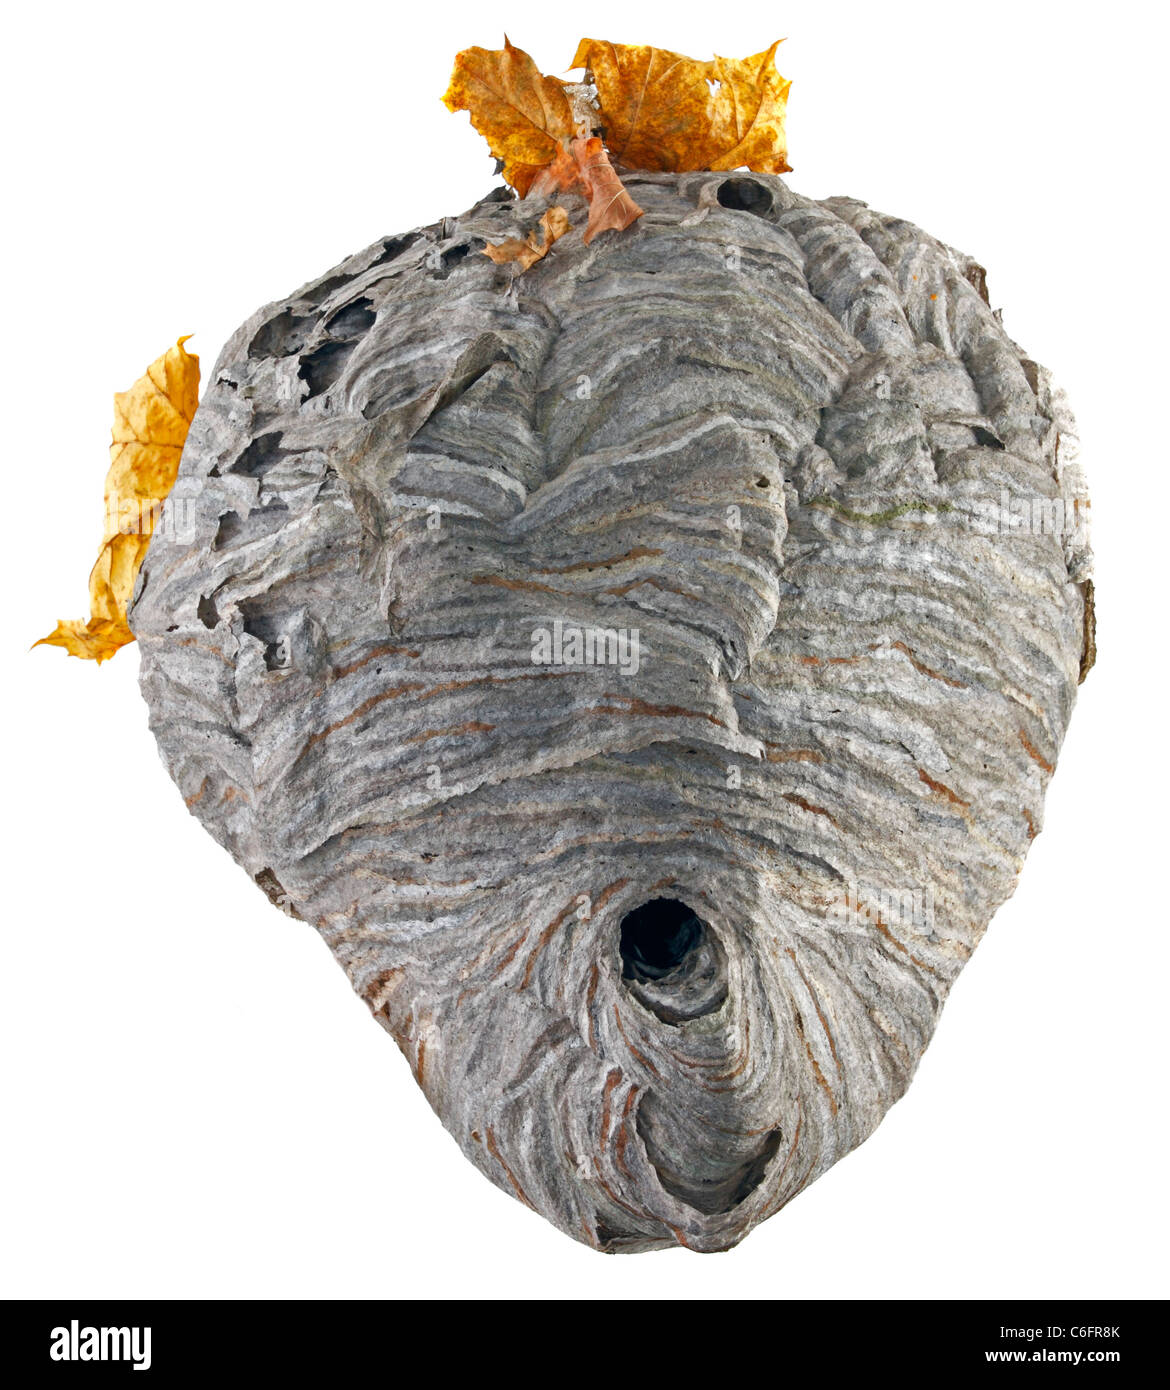 A real hornet nest with yellow leaves isolated on white background. Stock Photo